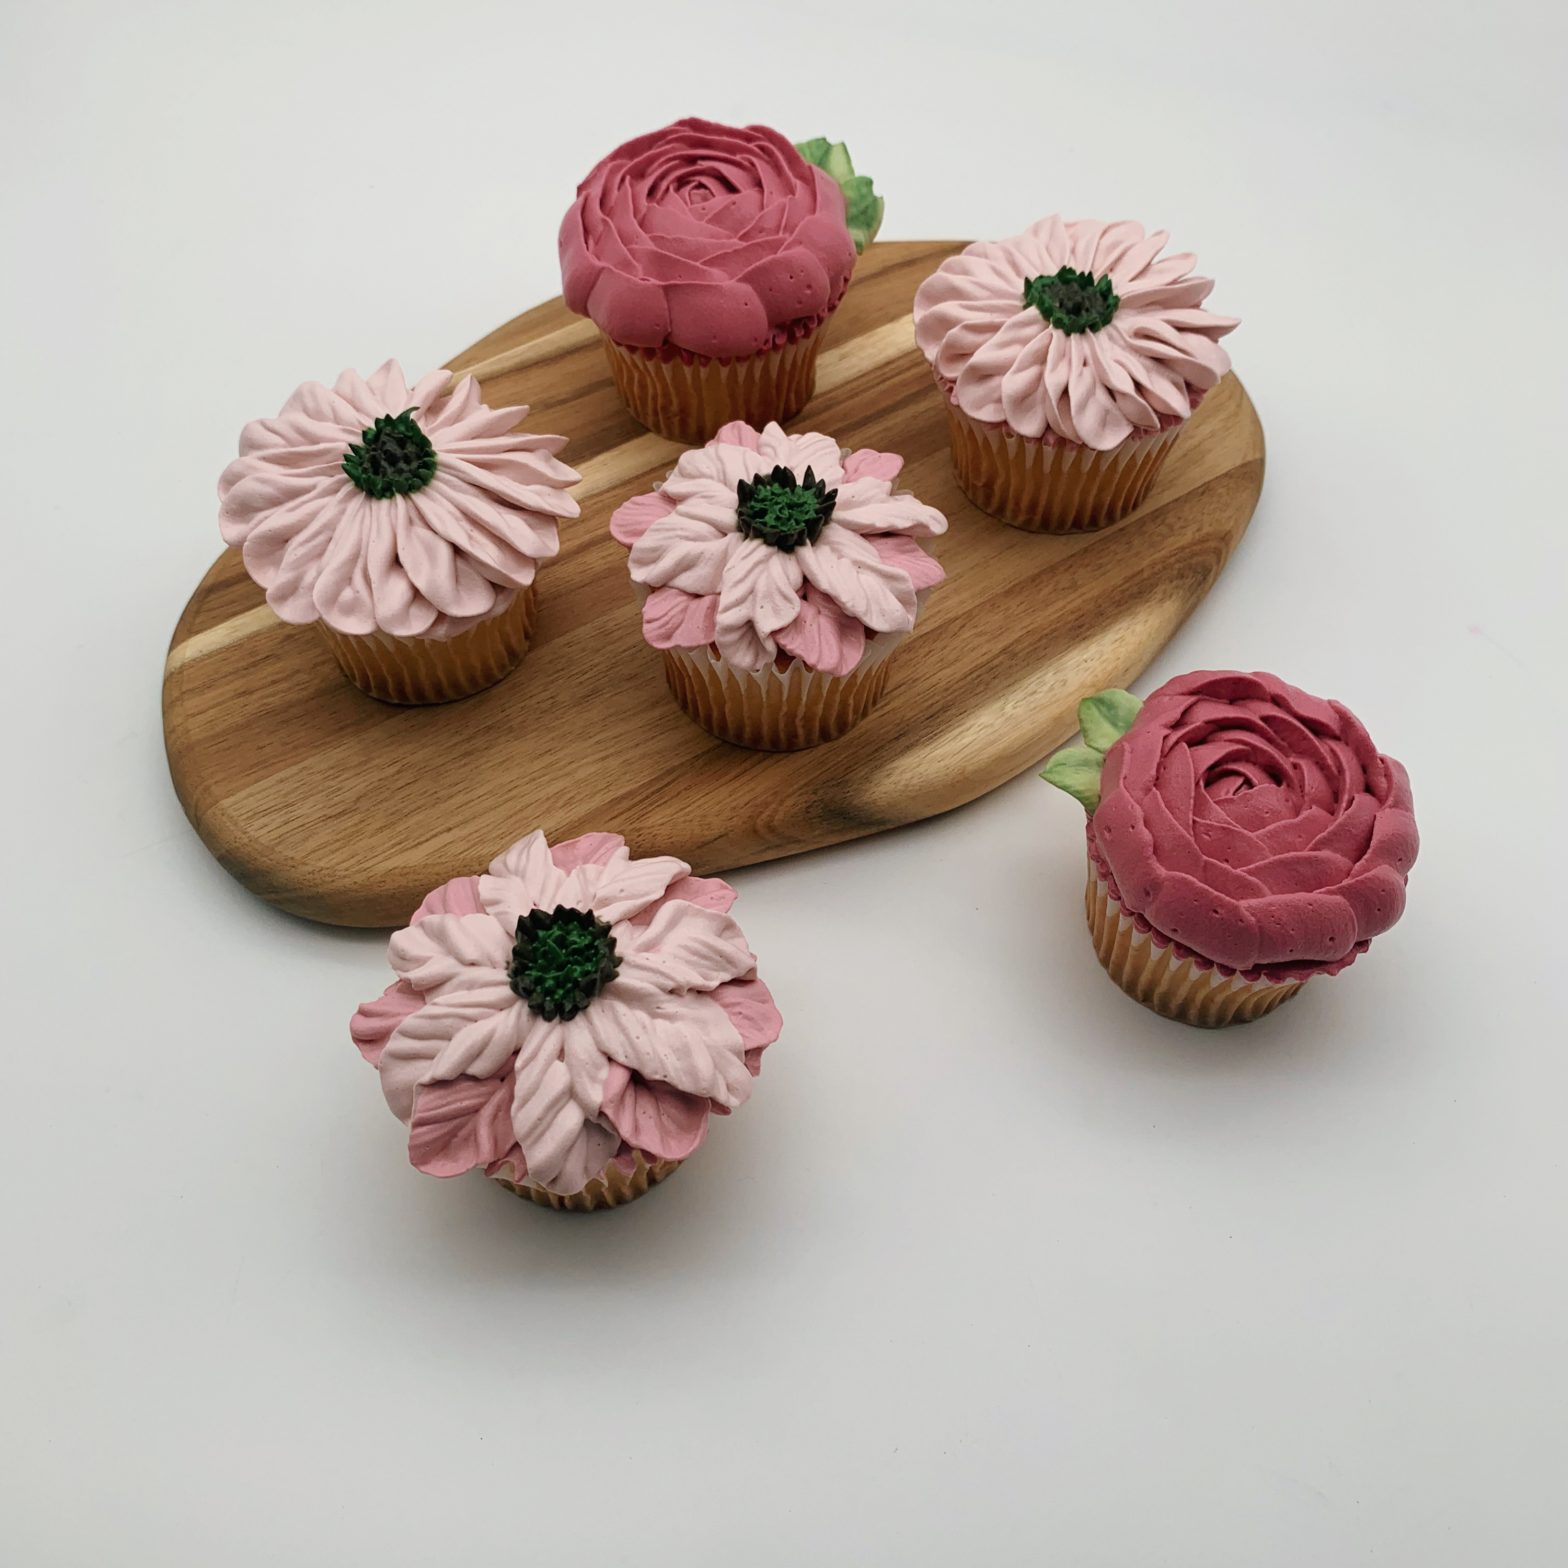 MOTHER’S DAY CUPCAKES